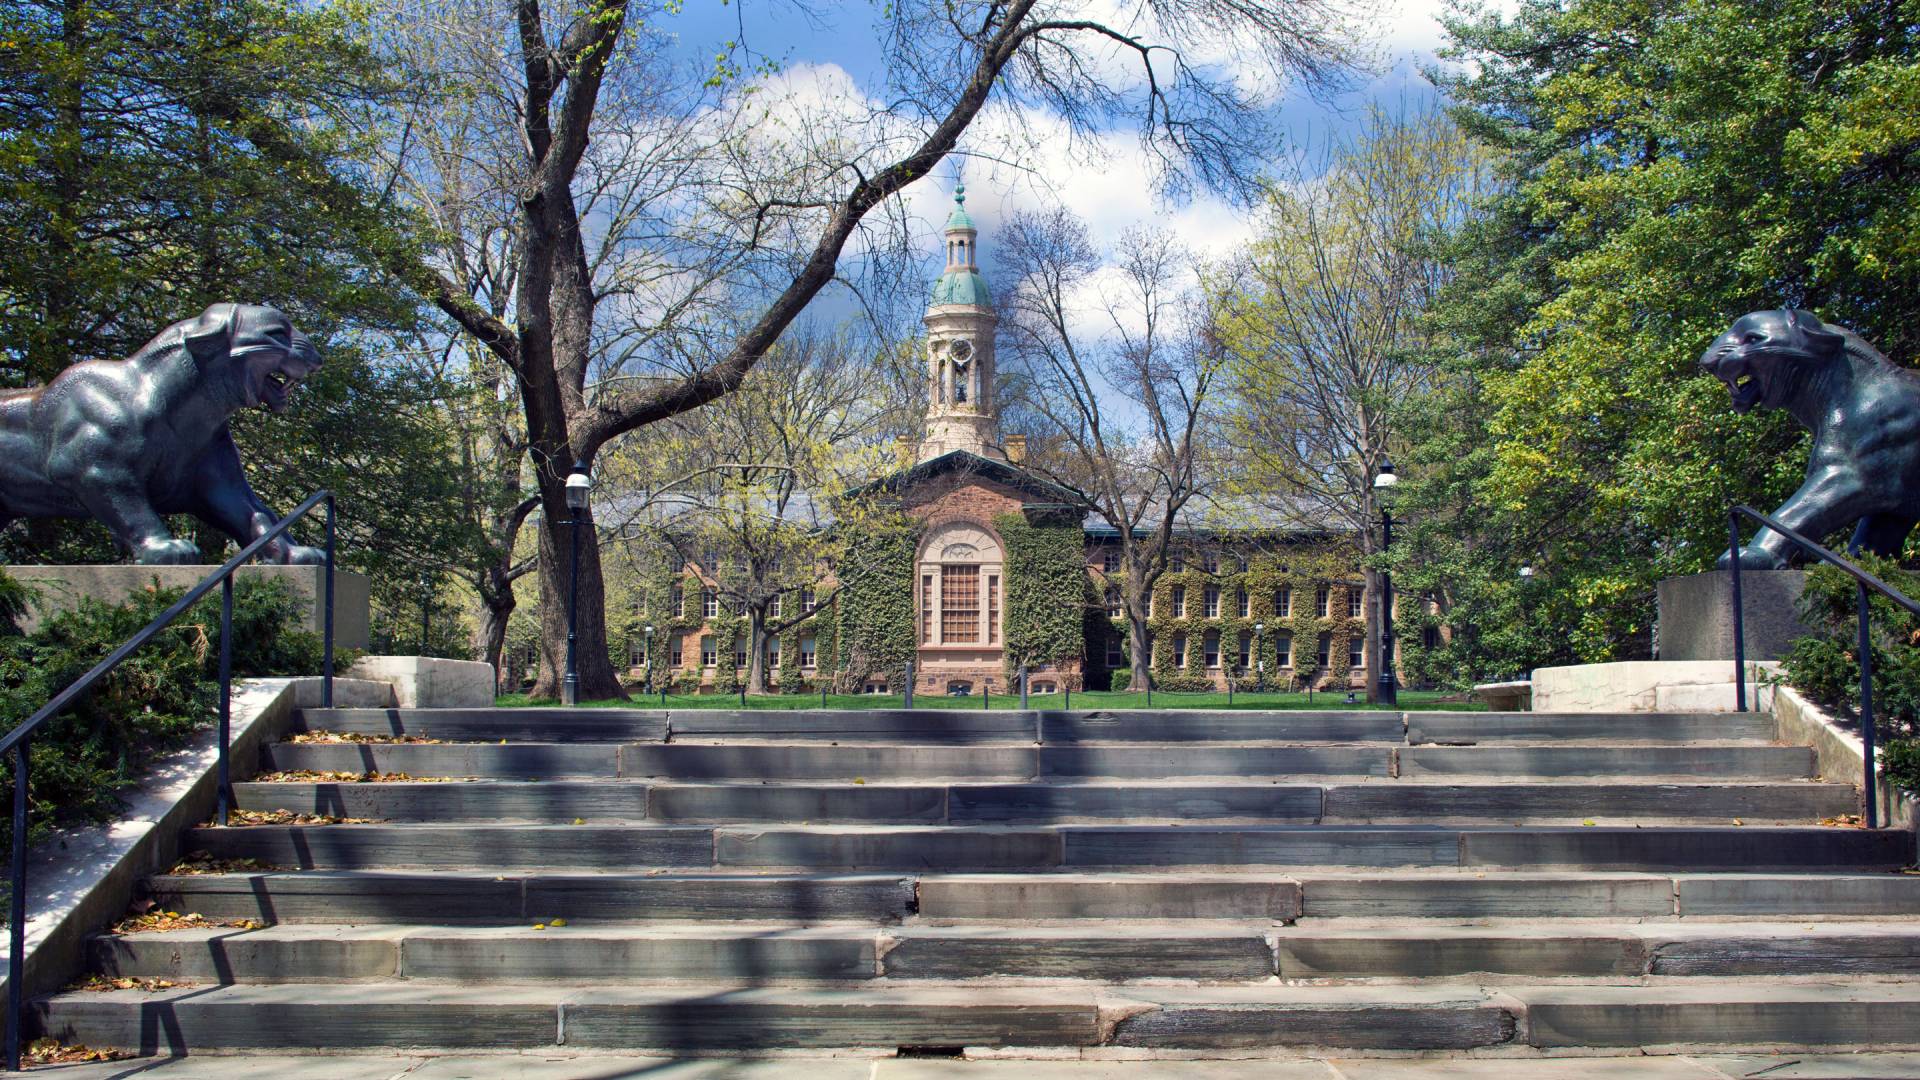 Stairs lead to area behind Nassau Hall building